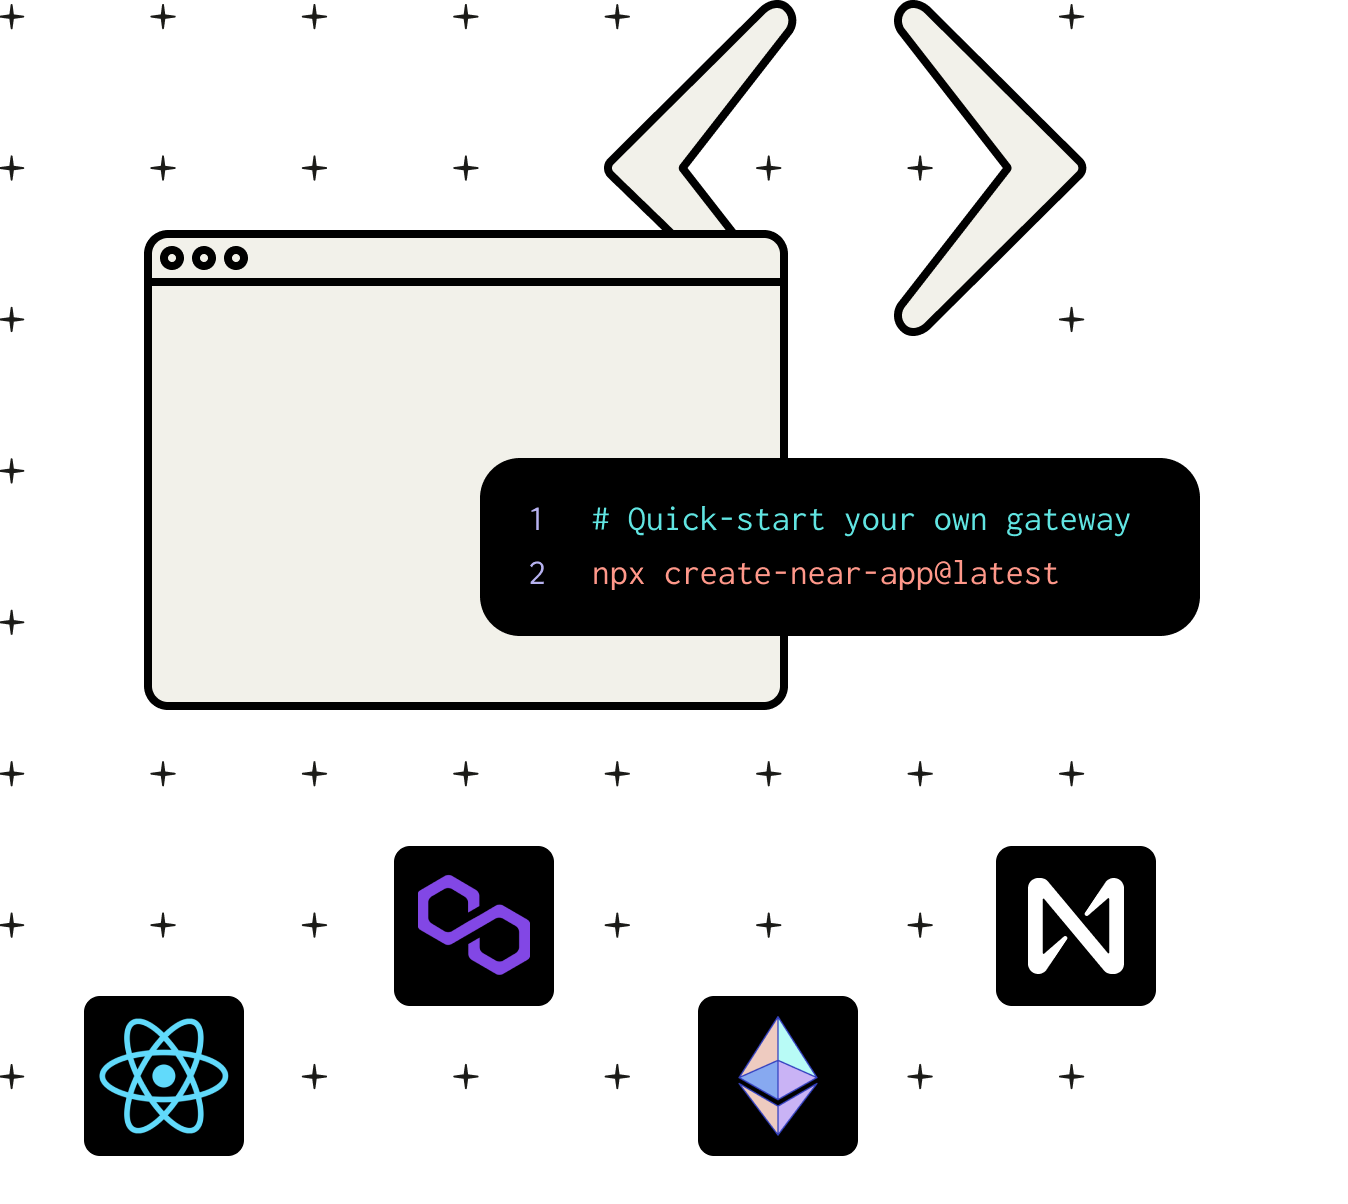 A browser window and a console window with the code snippet # Quick-start your own gateway npx create-near-app@latest alongside the logos for React JS, Ethereum, Polygon, and NEAR.